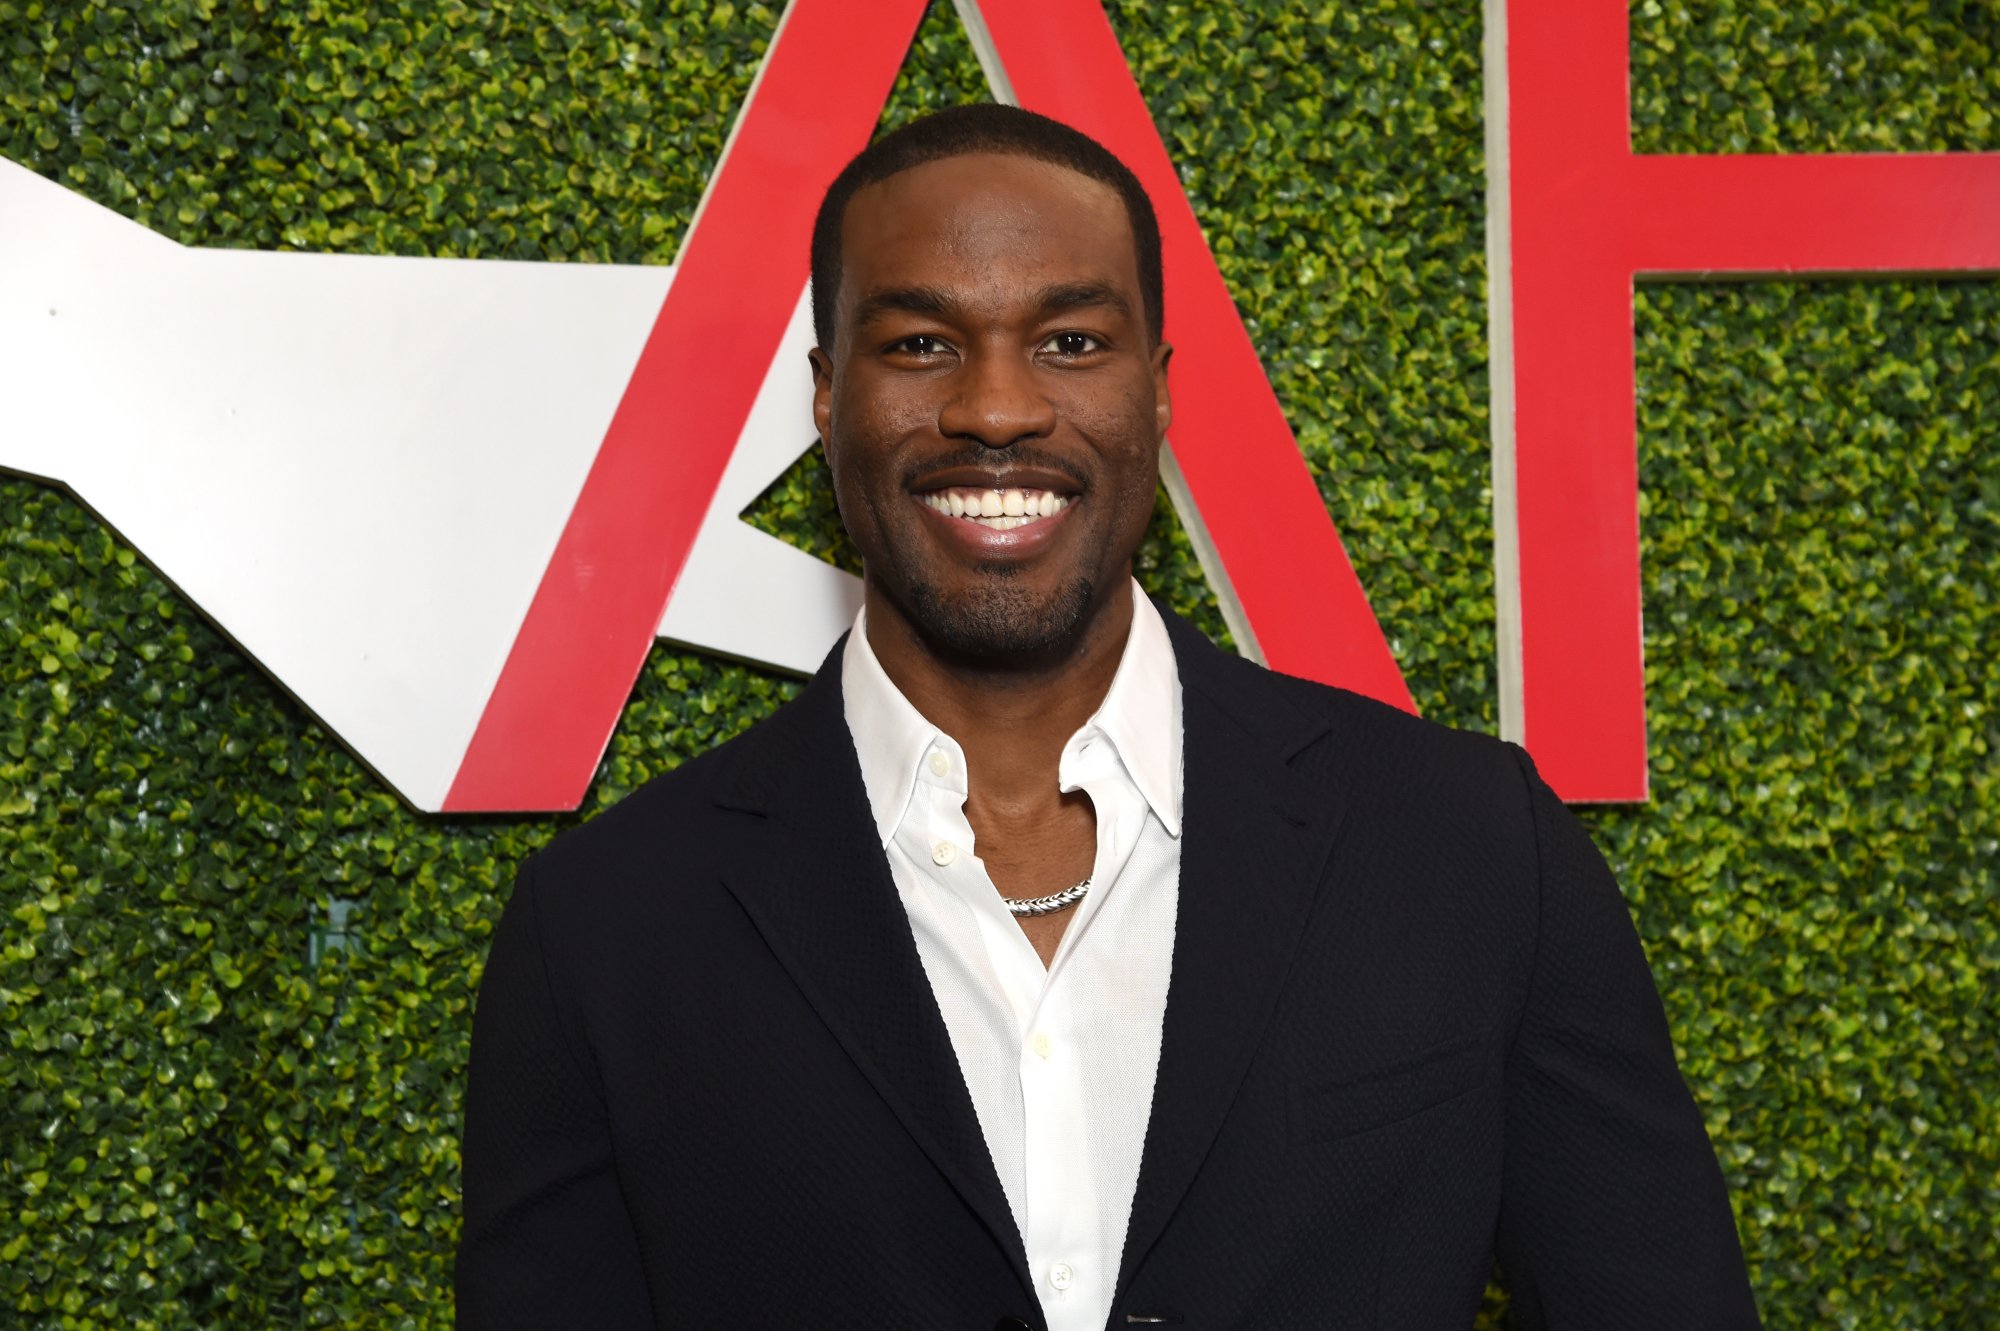 'The Matrix Resurrections' actor Yahya Abdul-Mateen II with dress shirt in front of AFI logo